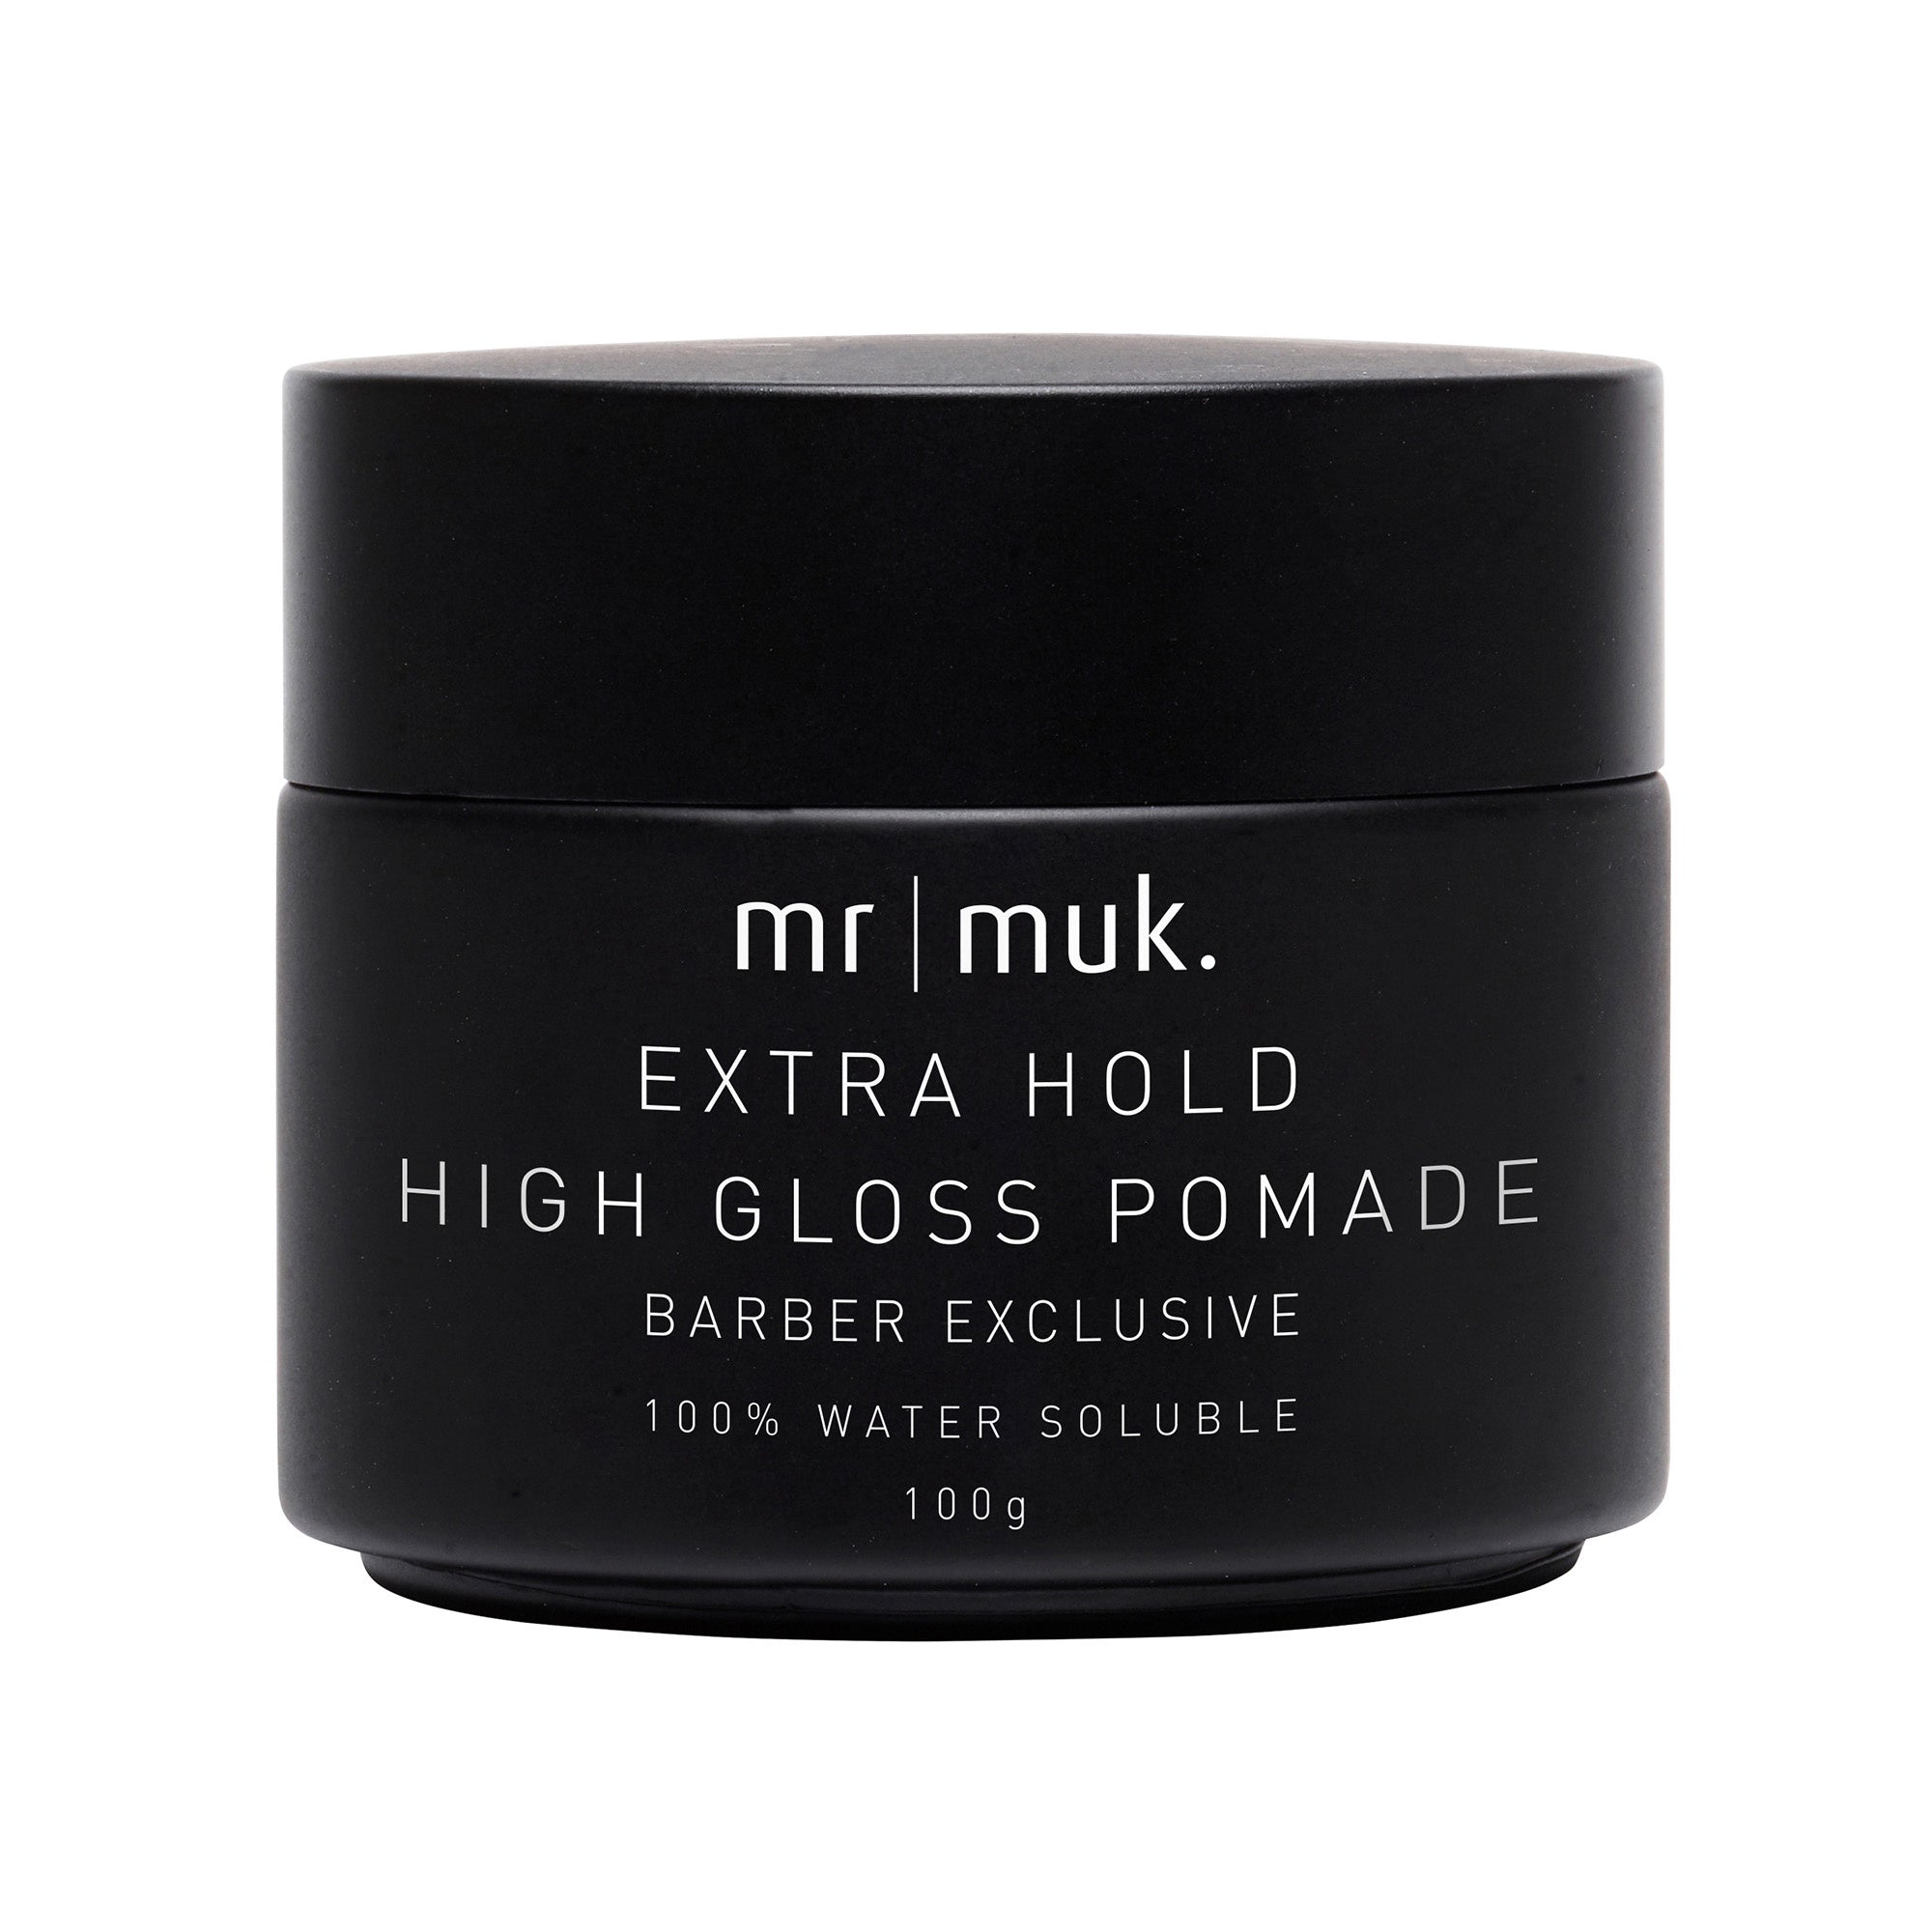 Mr Muk Extra Hold High Gloss Pomade provides maximum shine and definition without the grease factor